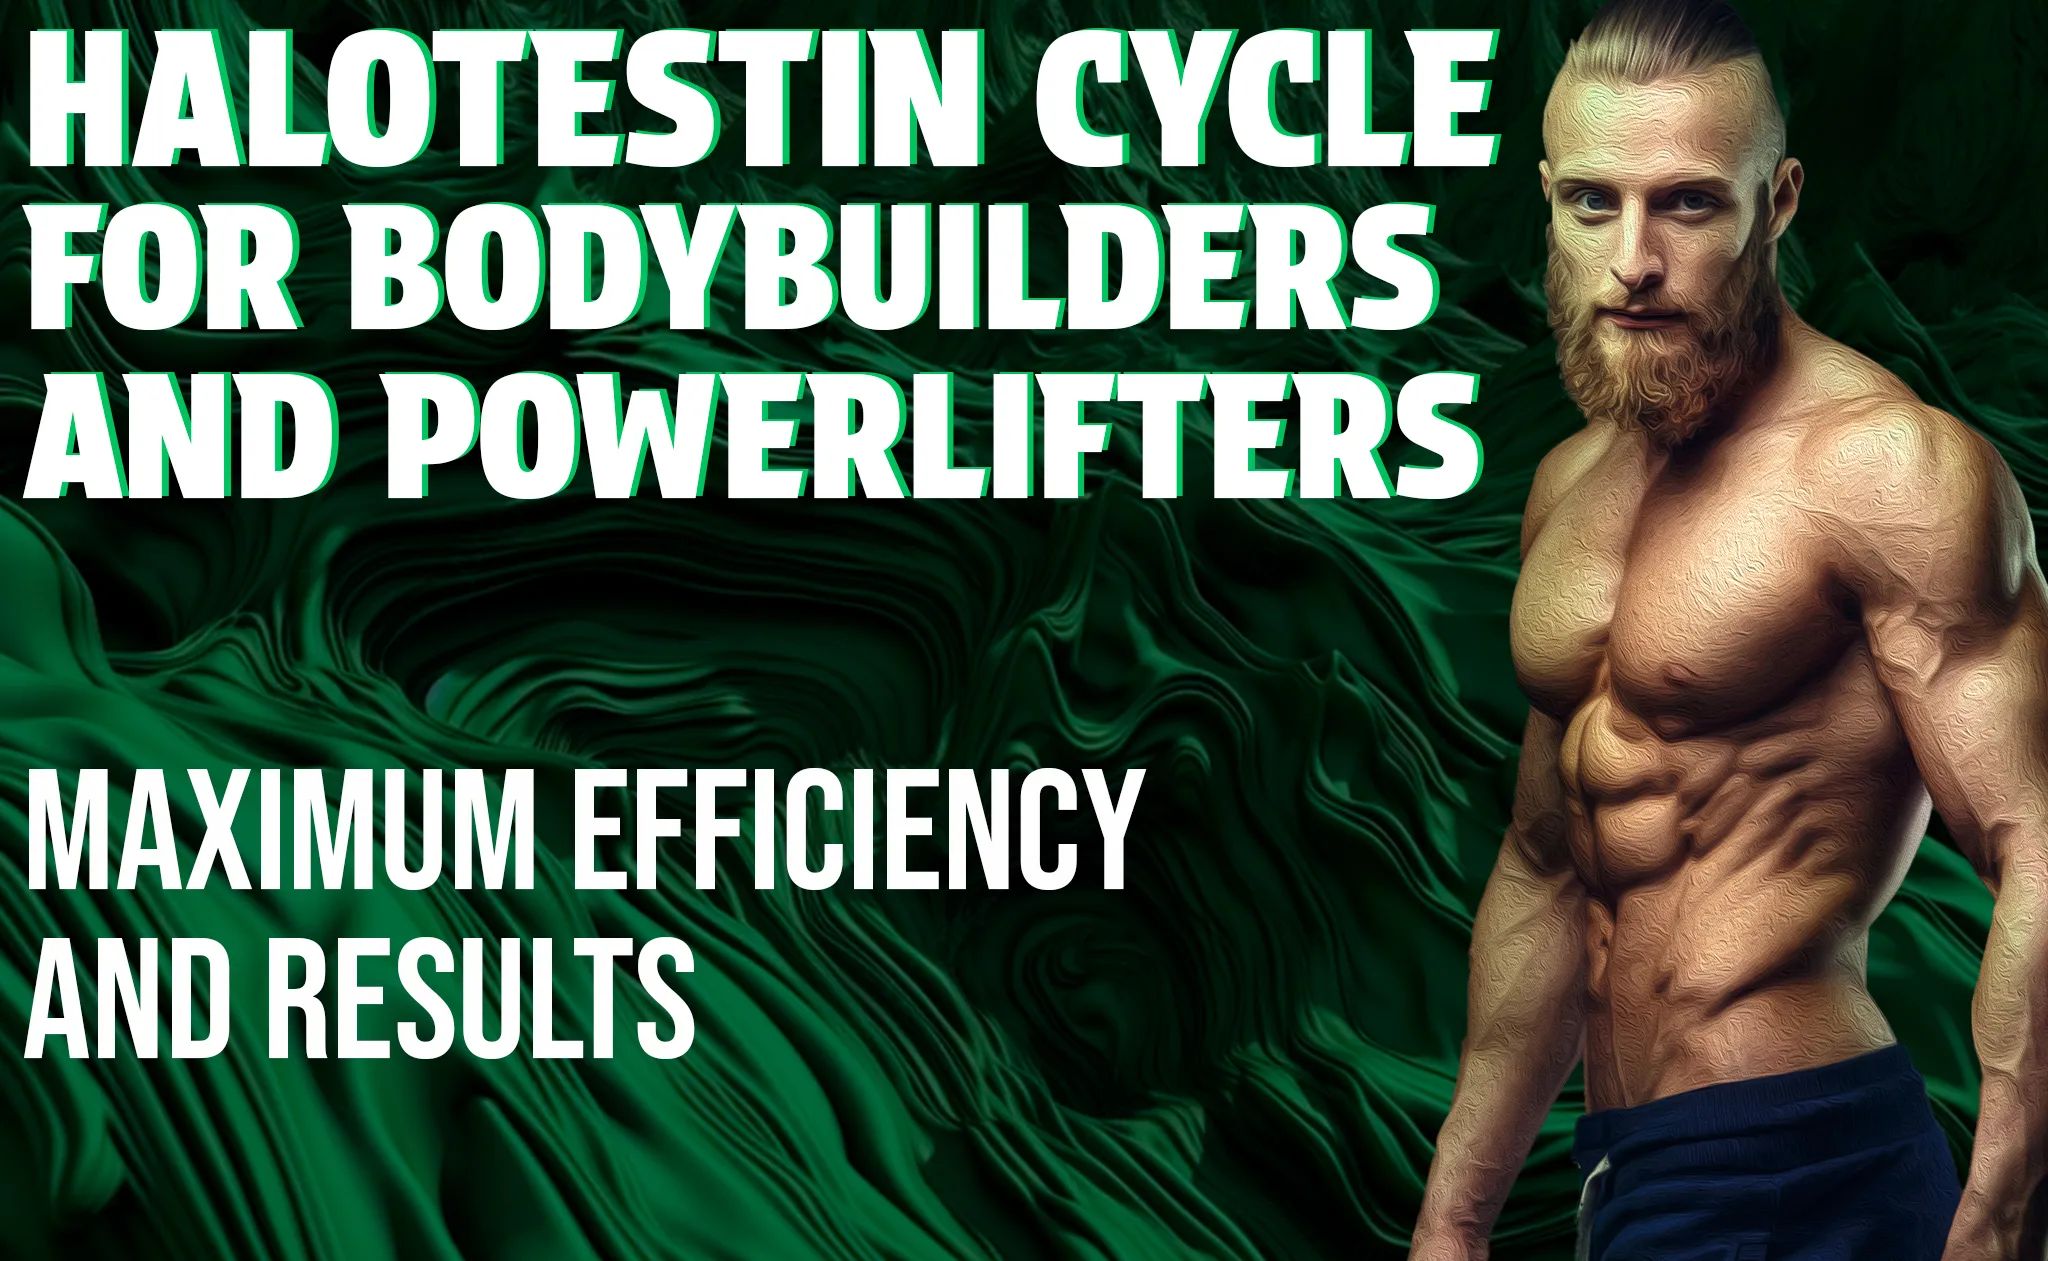 Halotestin Cycle for Bodybuilders and Powerlifters – Maximum Efficiency and Results